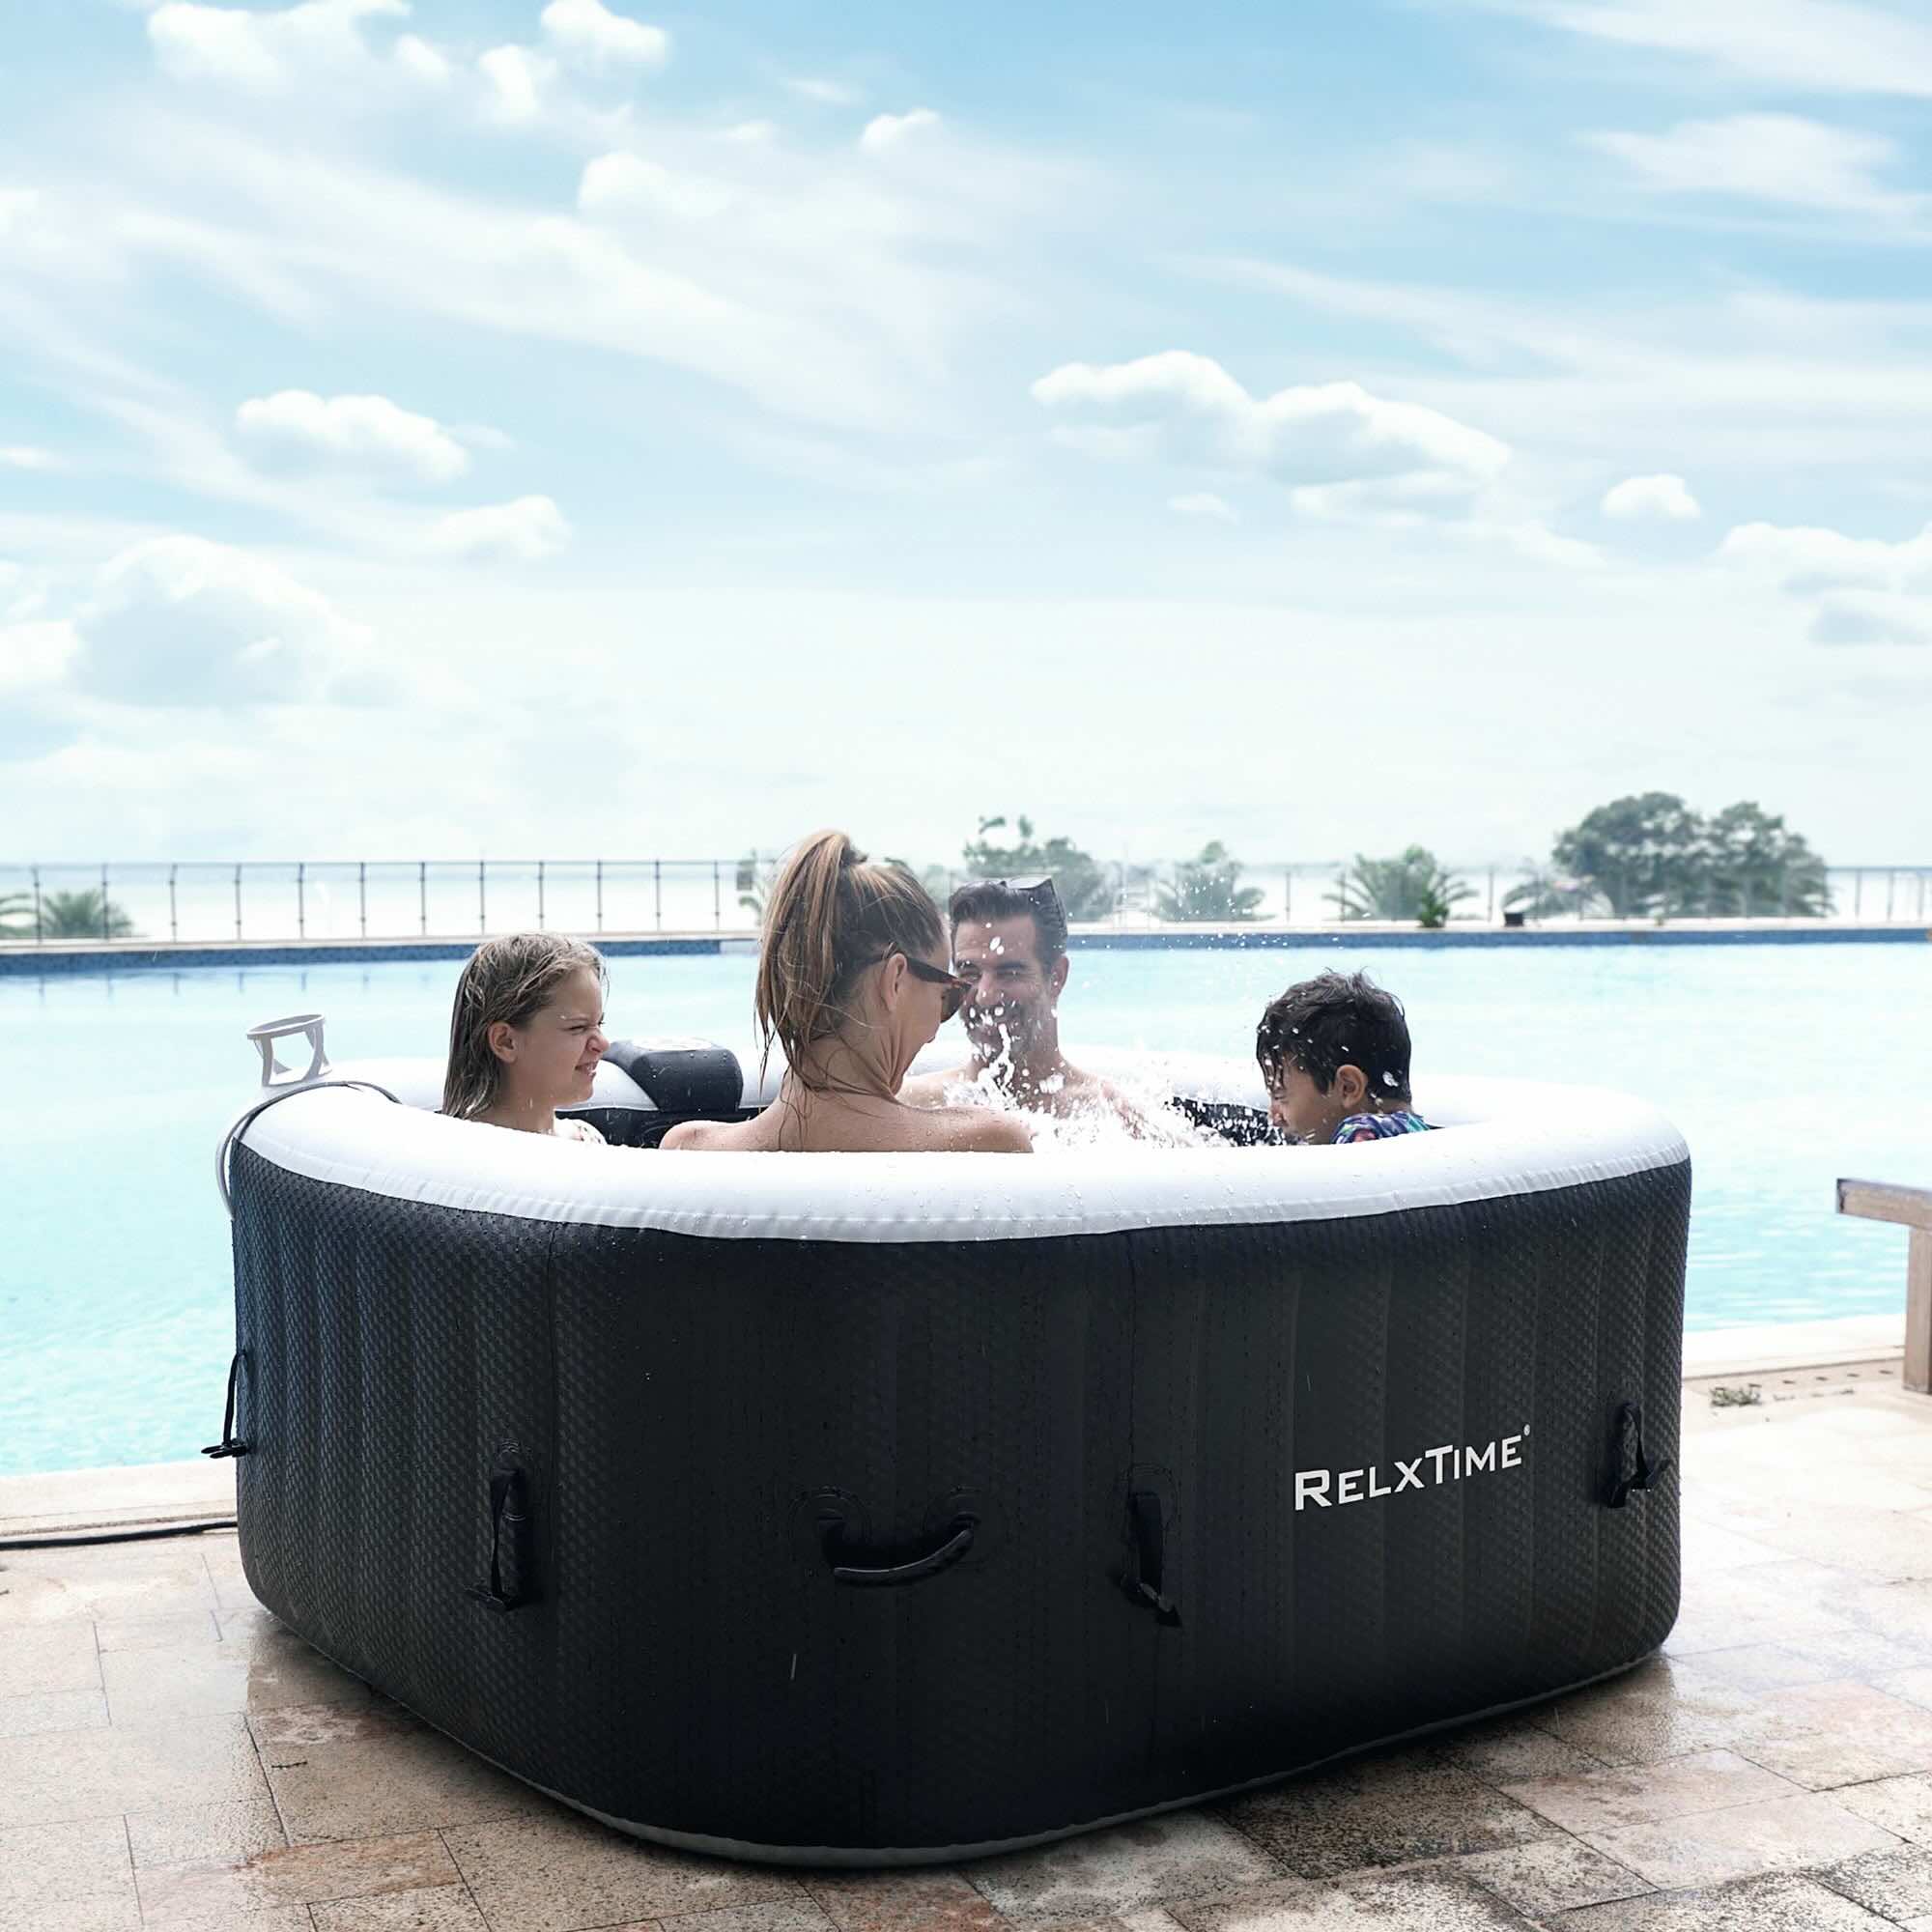 #WEJOY AquaSpa Portable Hot Tub 61X61X26 Inch Air Jet Spa 2-3 Person  Inflatable Square Outdoor Heated Hot Tub Spa with 120 Bubble Jets,  Black/White